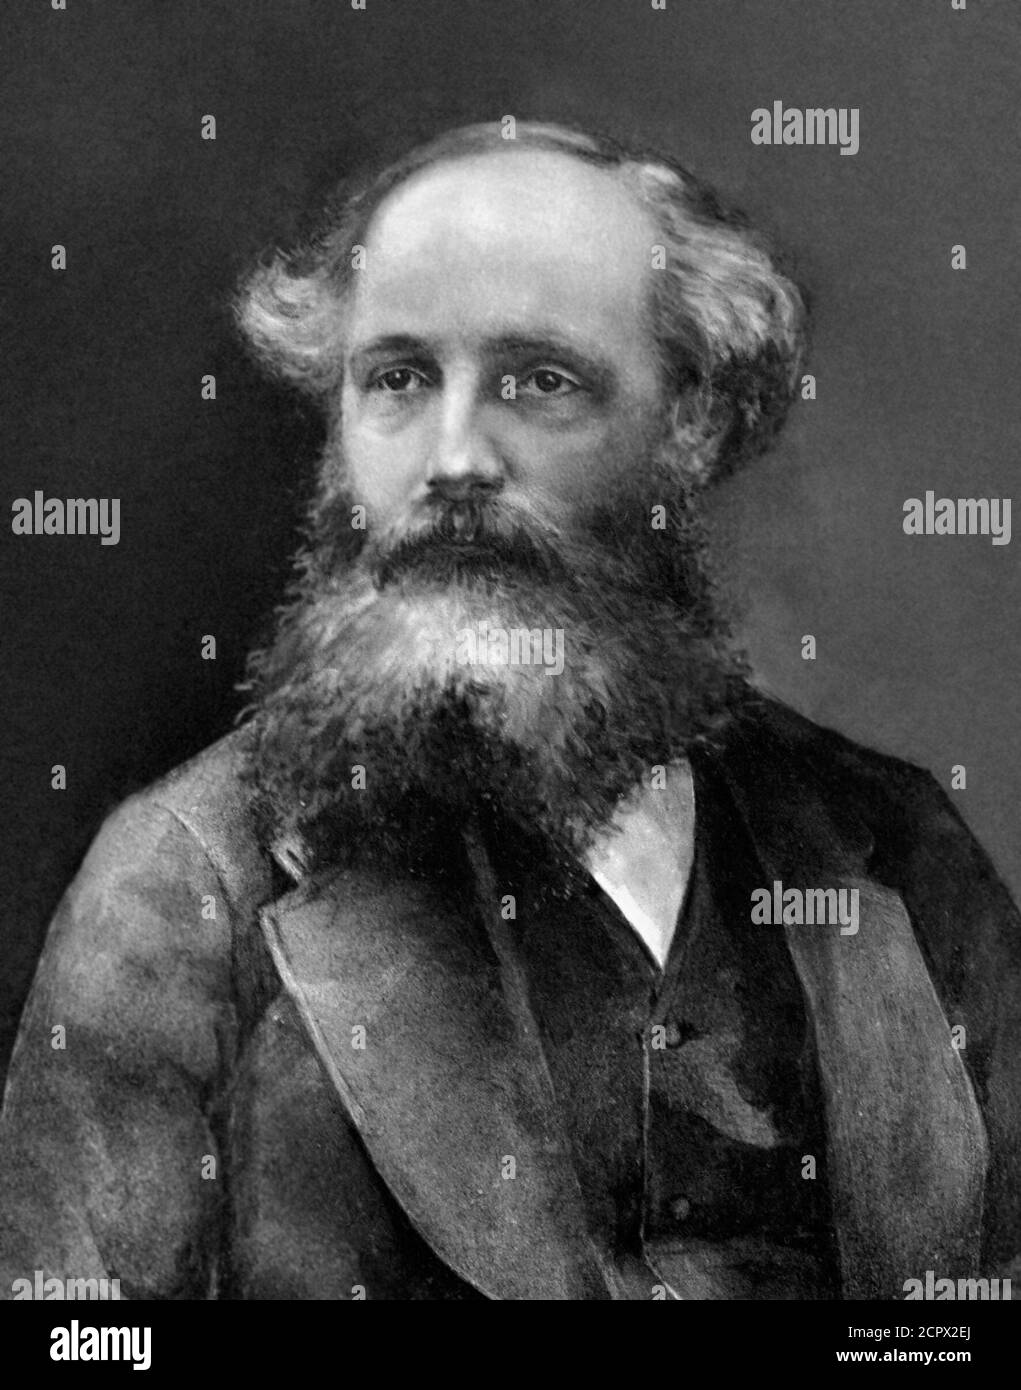 James Clerk Maxwell. Portrait of the Scottish scientist, James Clerk Maxwell (1831-1879) whose most notable achievement was to formulate the classical theory of electromagnetic radiation. Stock Photo